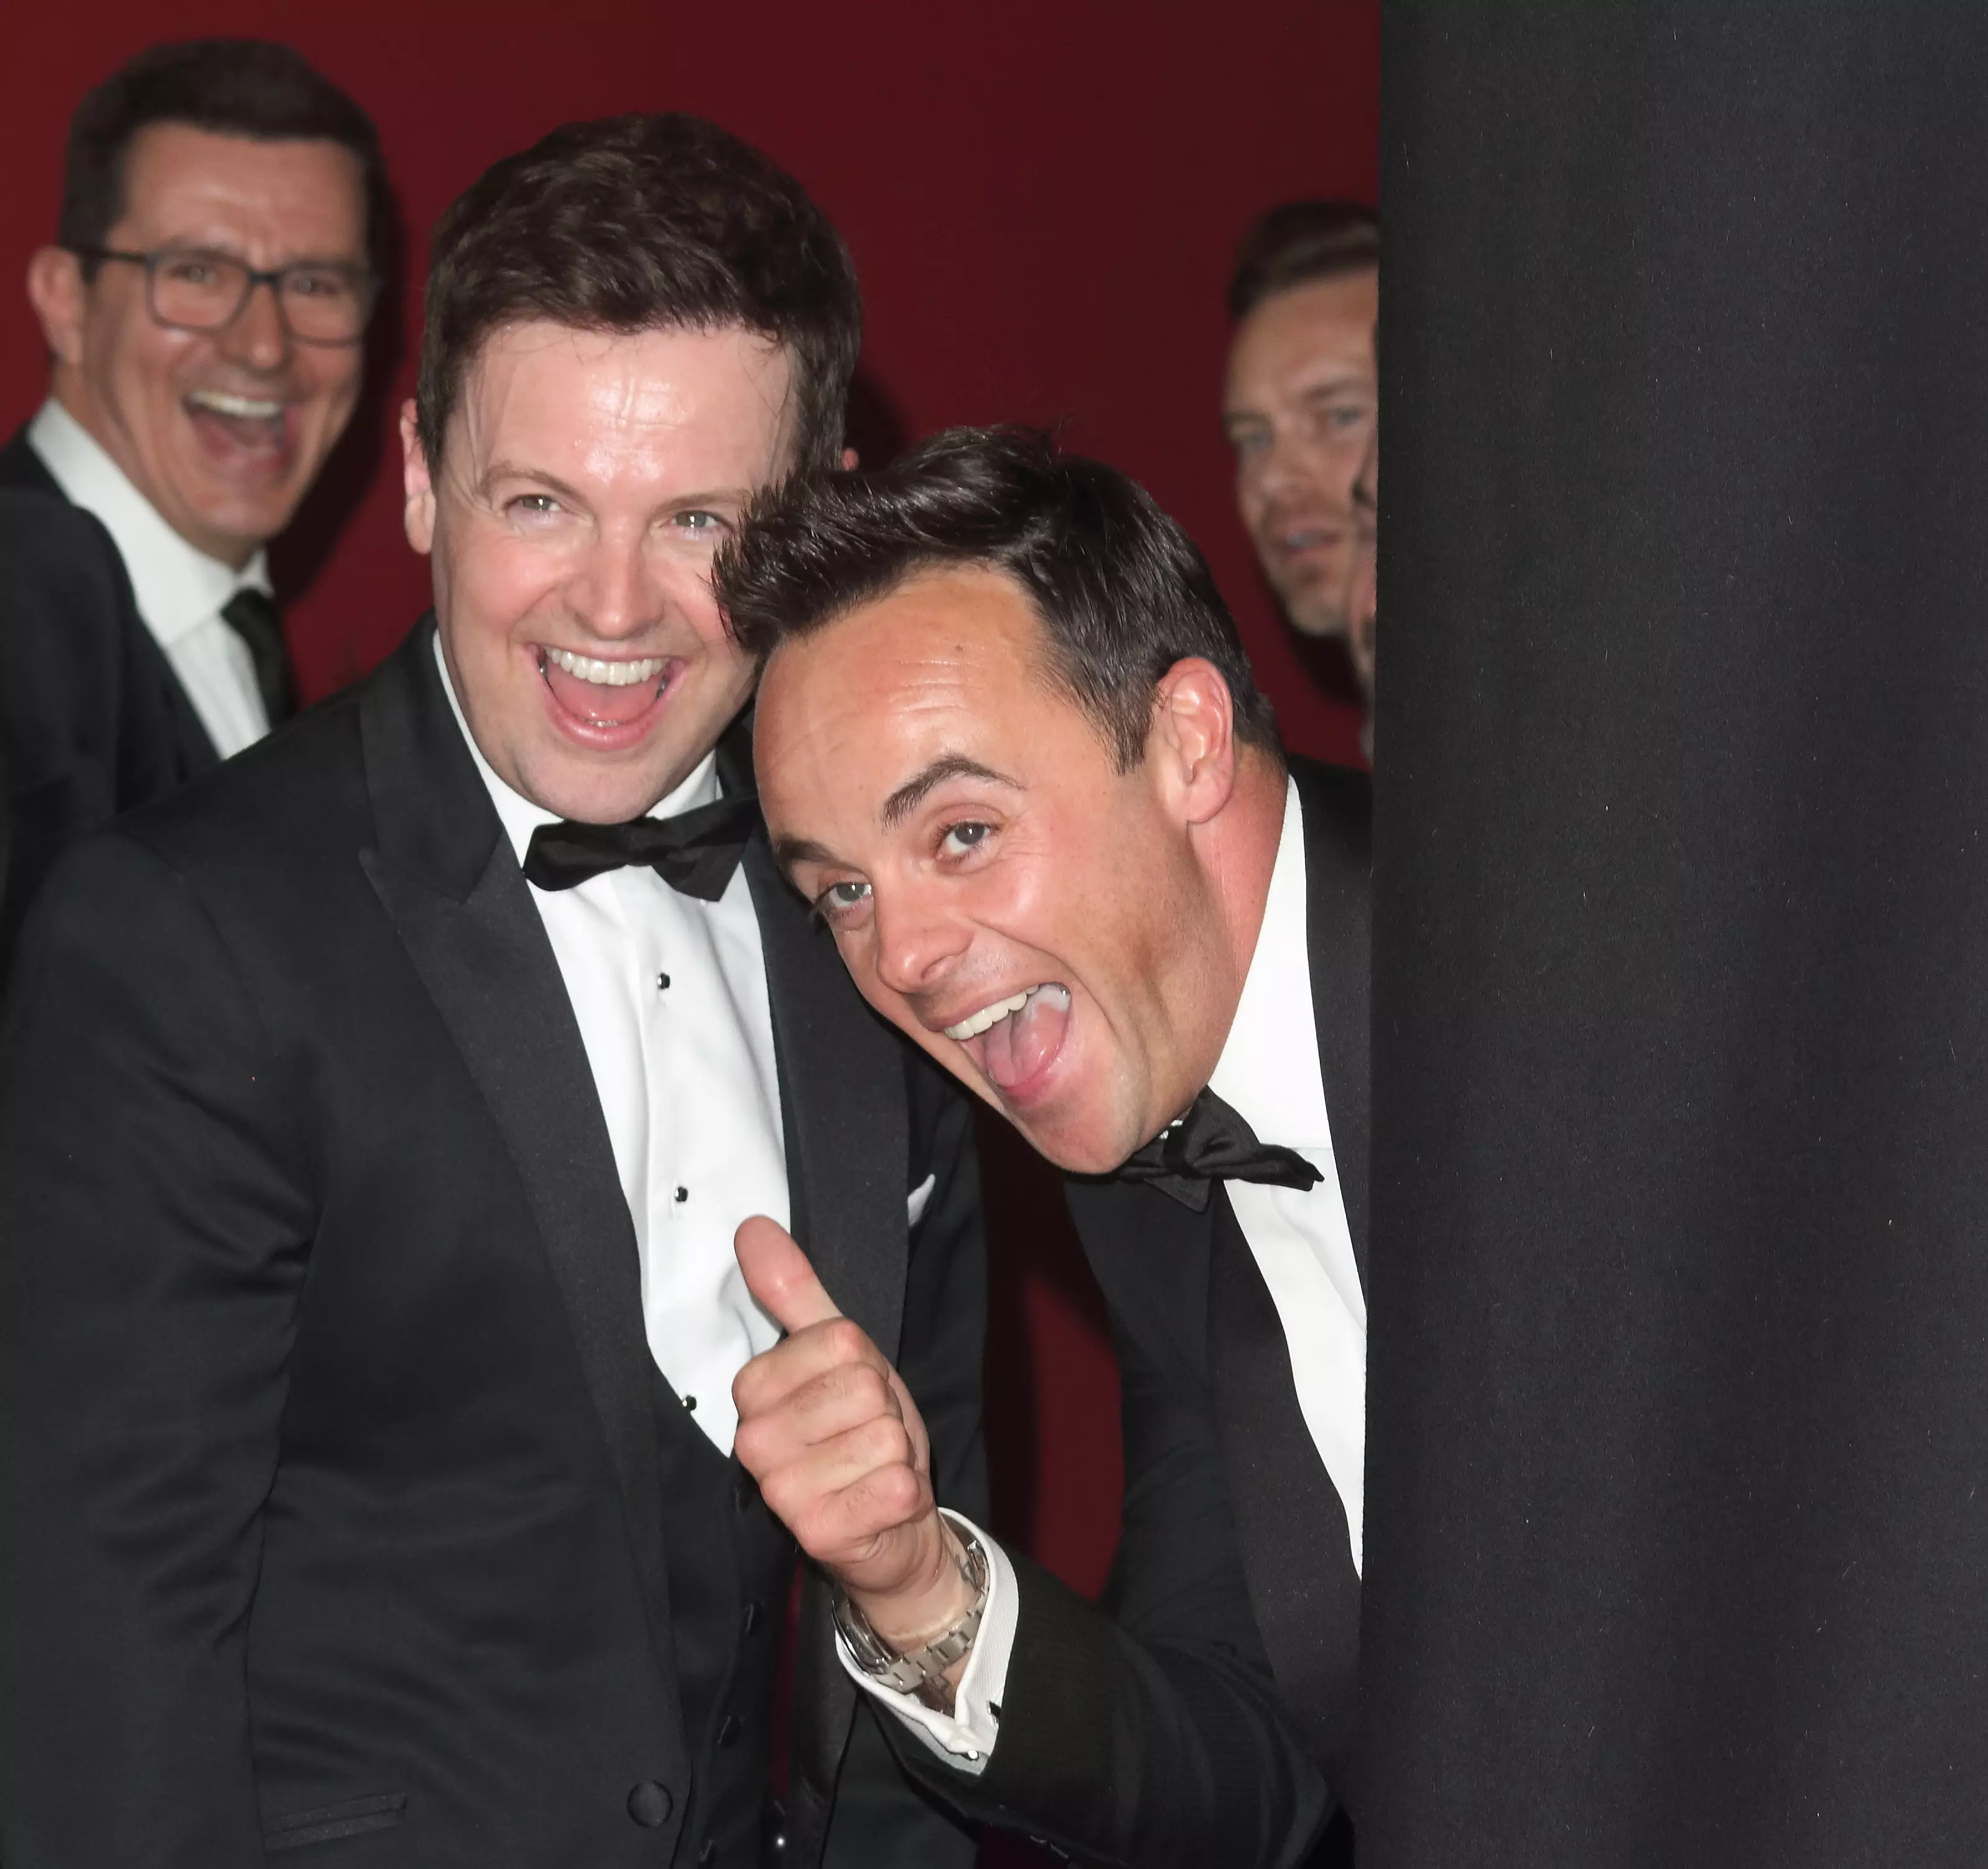 Ant and Dec will return to host this year's I'm a Celeb.